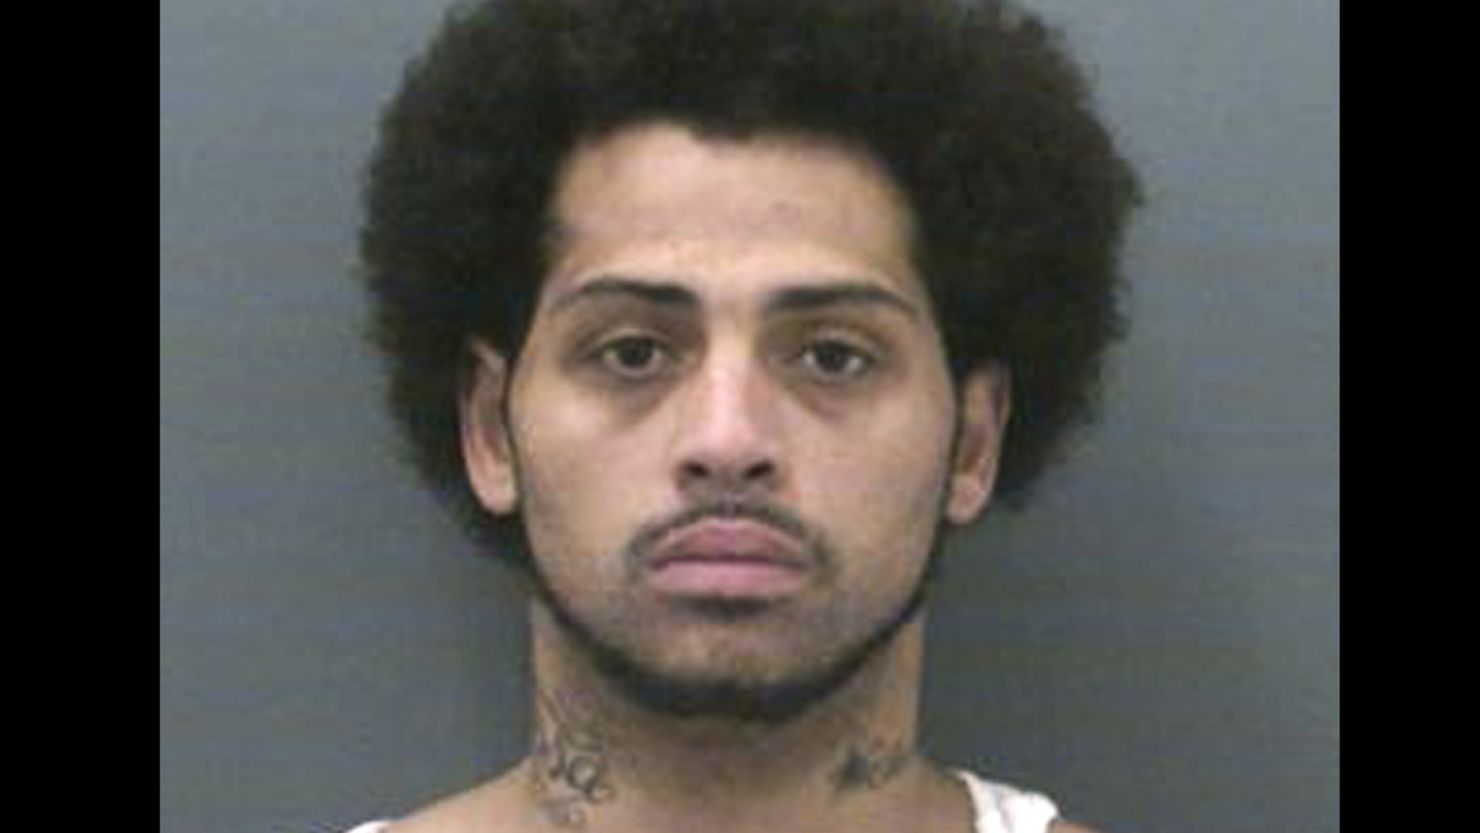 Carlos Ortiz pleaded not guilty to a charge of murder in connection with the 2013 homicide of Odin Lloyd in Massachusetts.